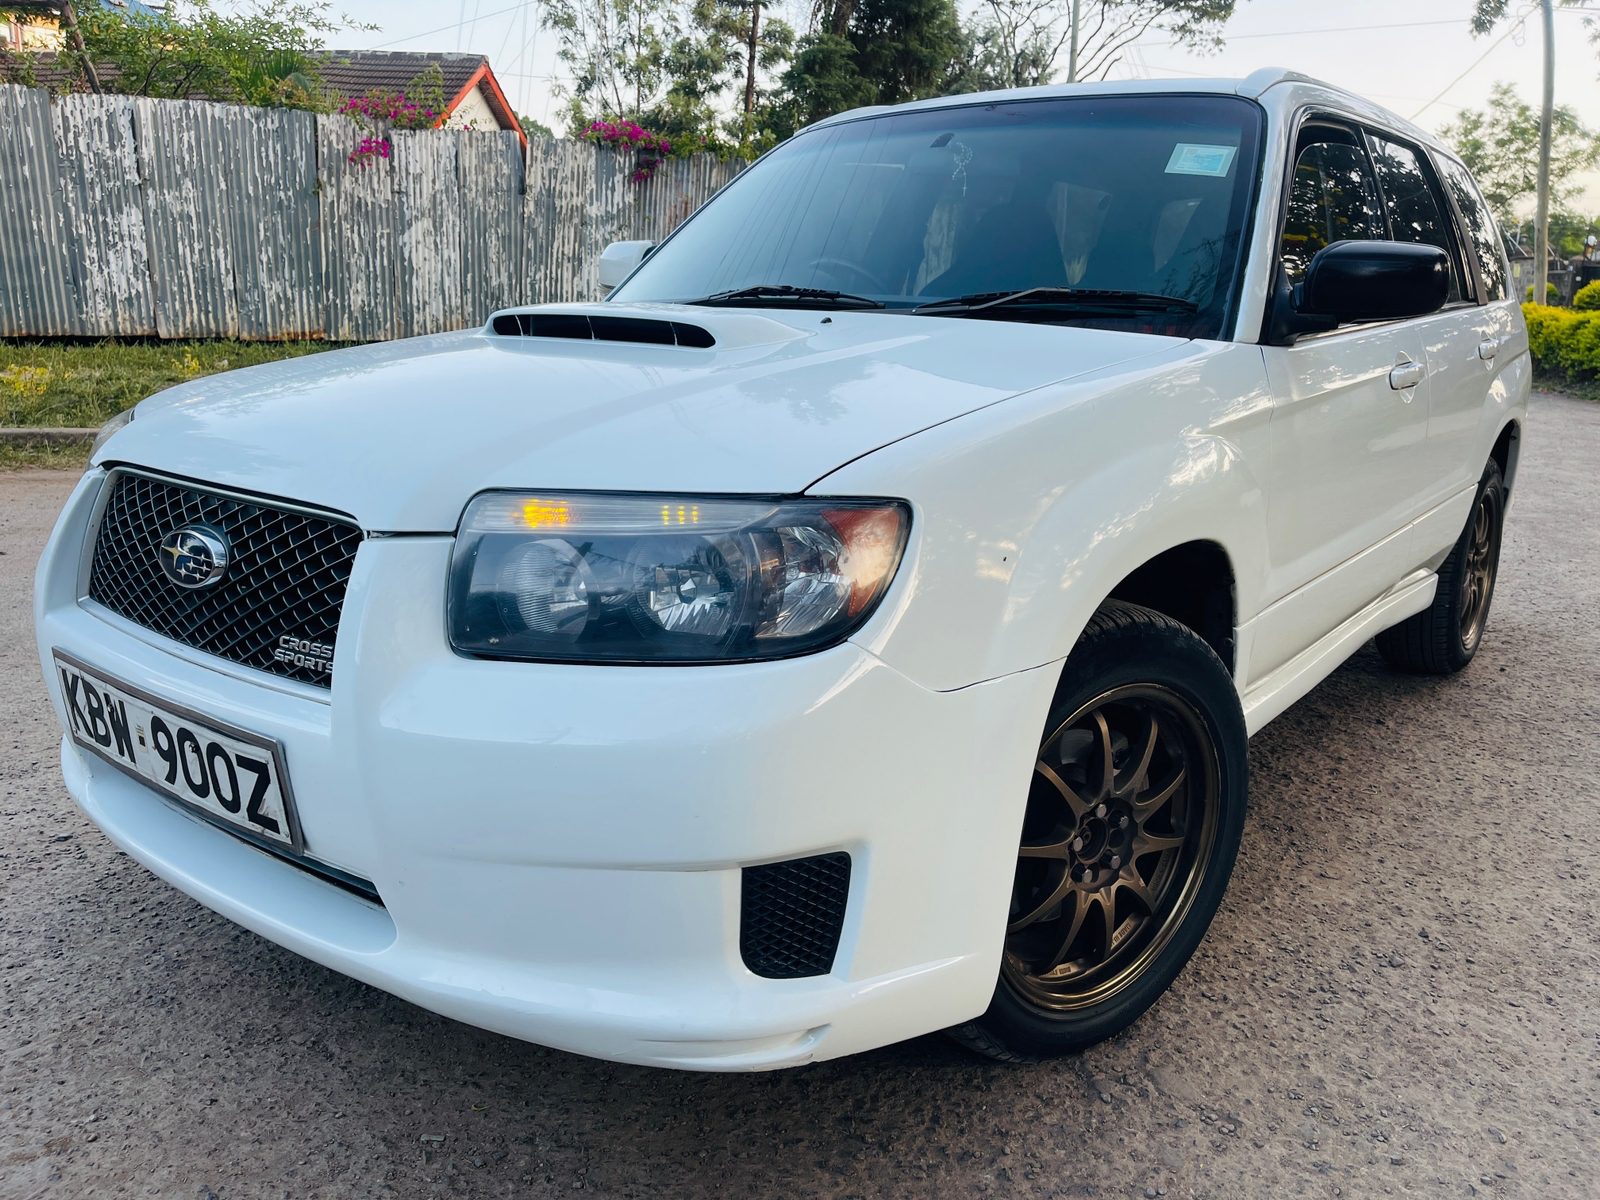 Subaru Forester Turbocharged You Pay 30% deposit Trade in Ok